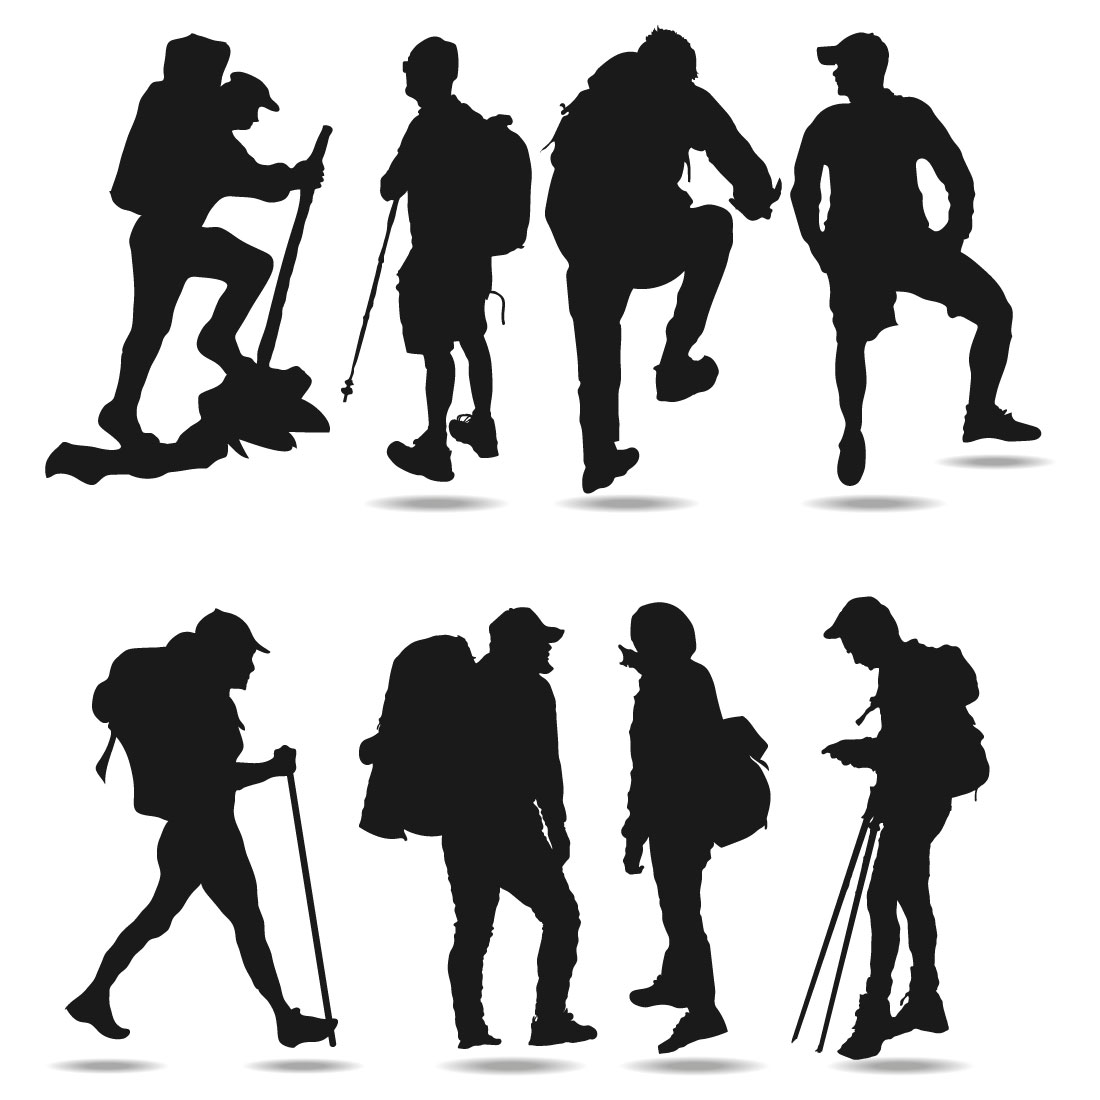 Climber hiker backpacker silhouette vector of a mountaineer preview image.